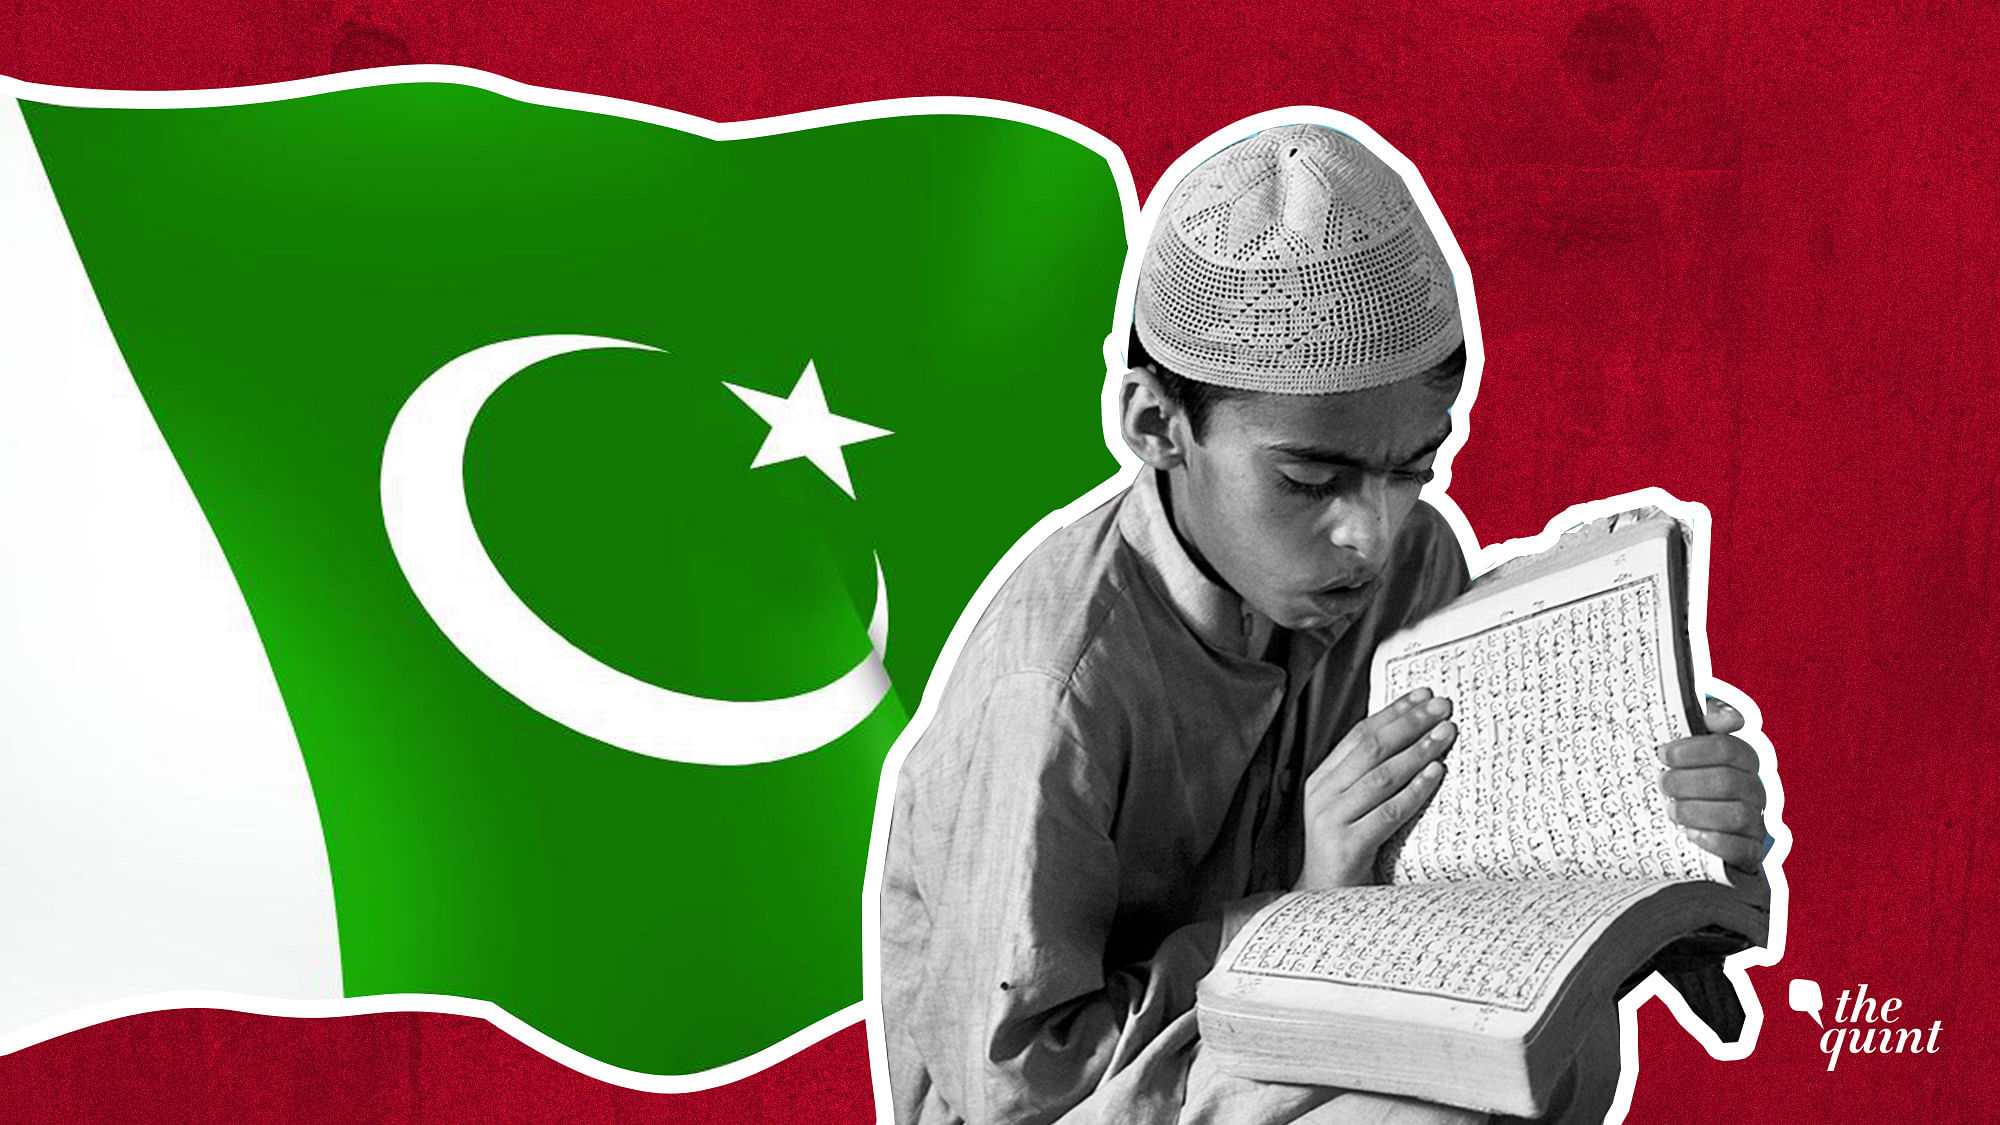 Arab interest in Pakistan’s Madrassas has played a potent role in radicalisation of curriculum over the years.